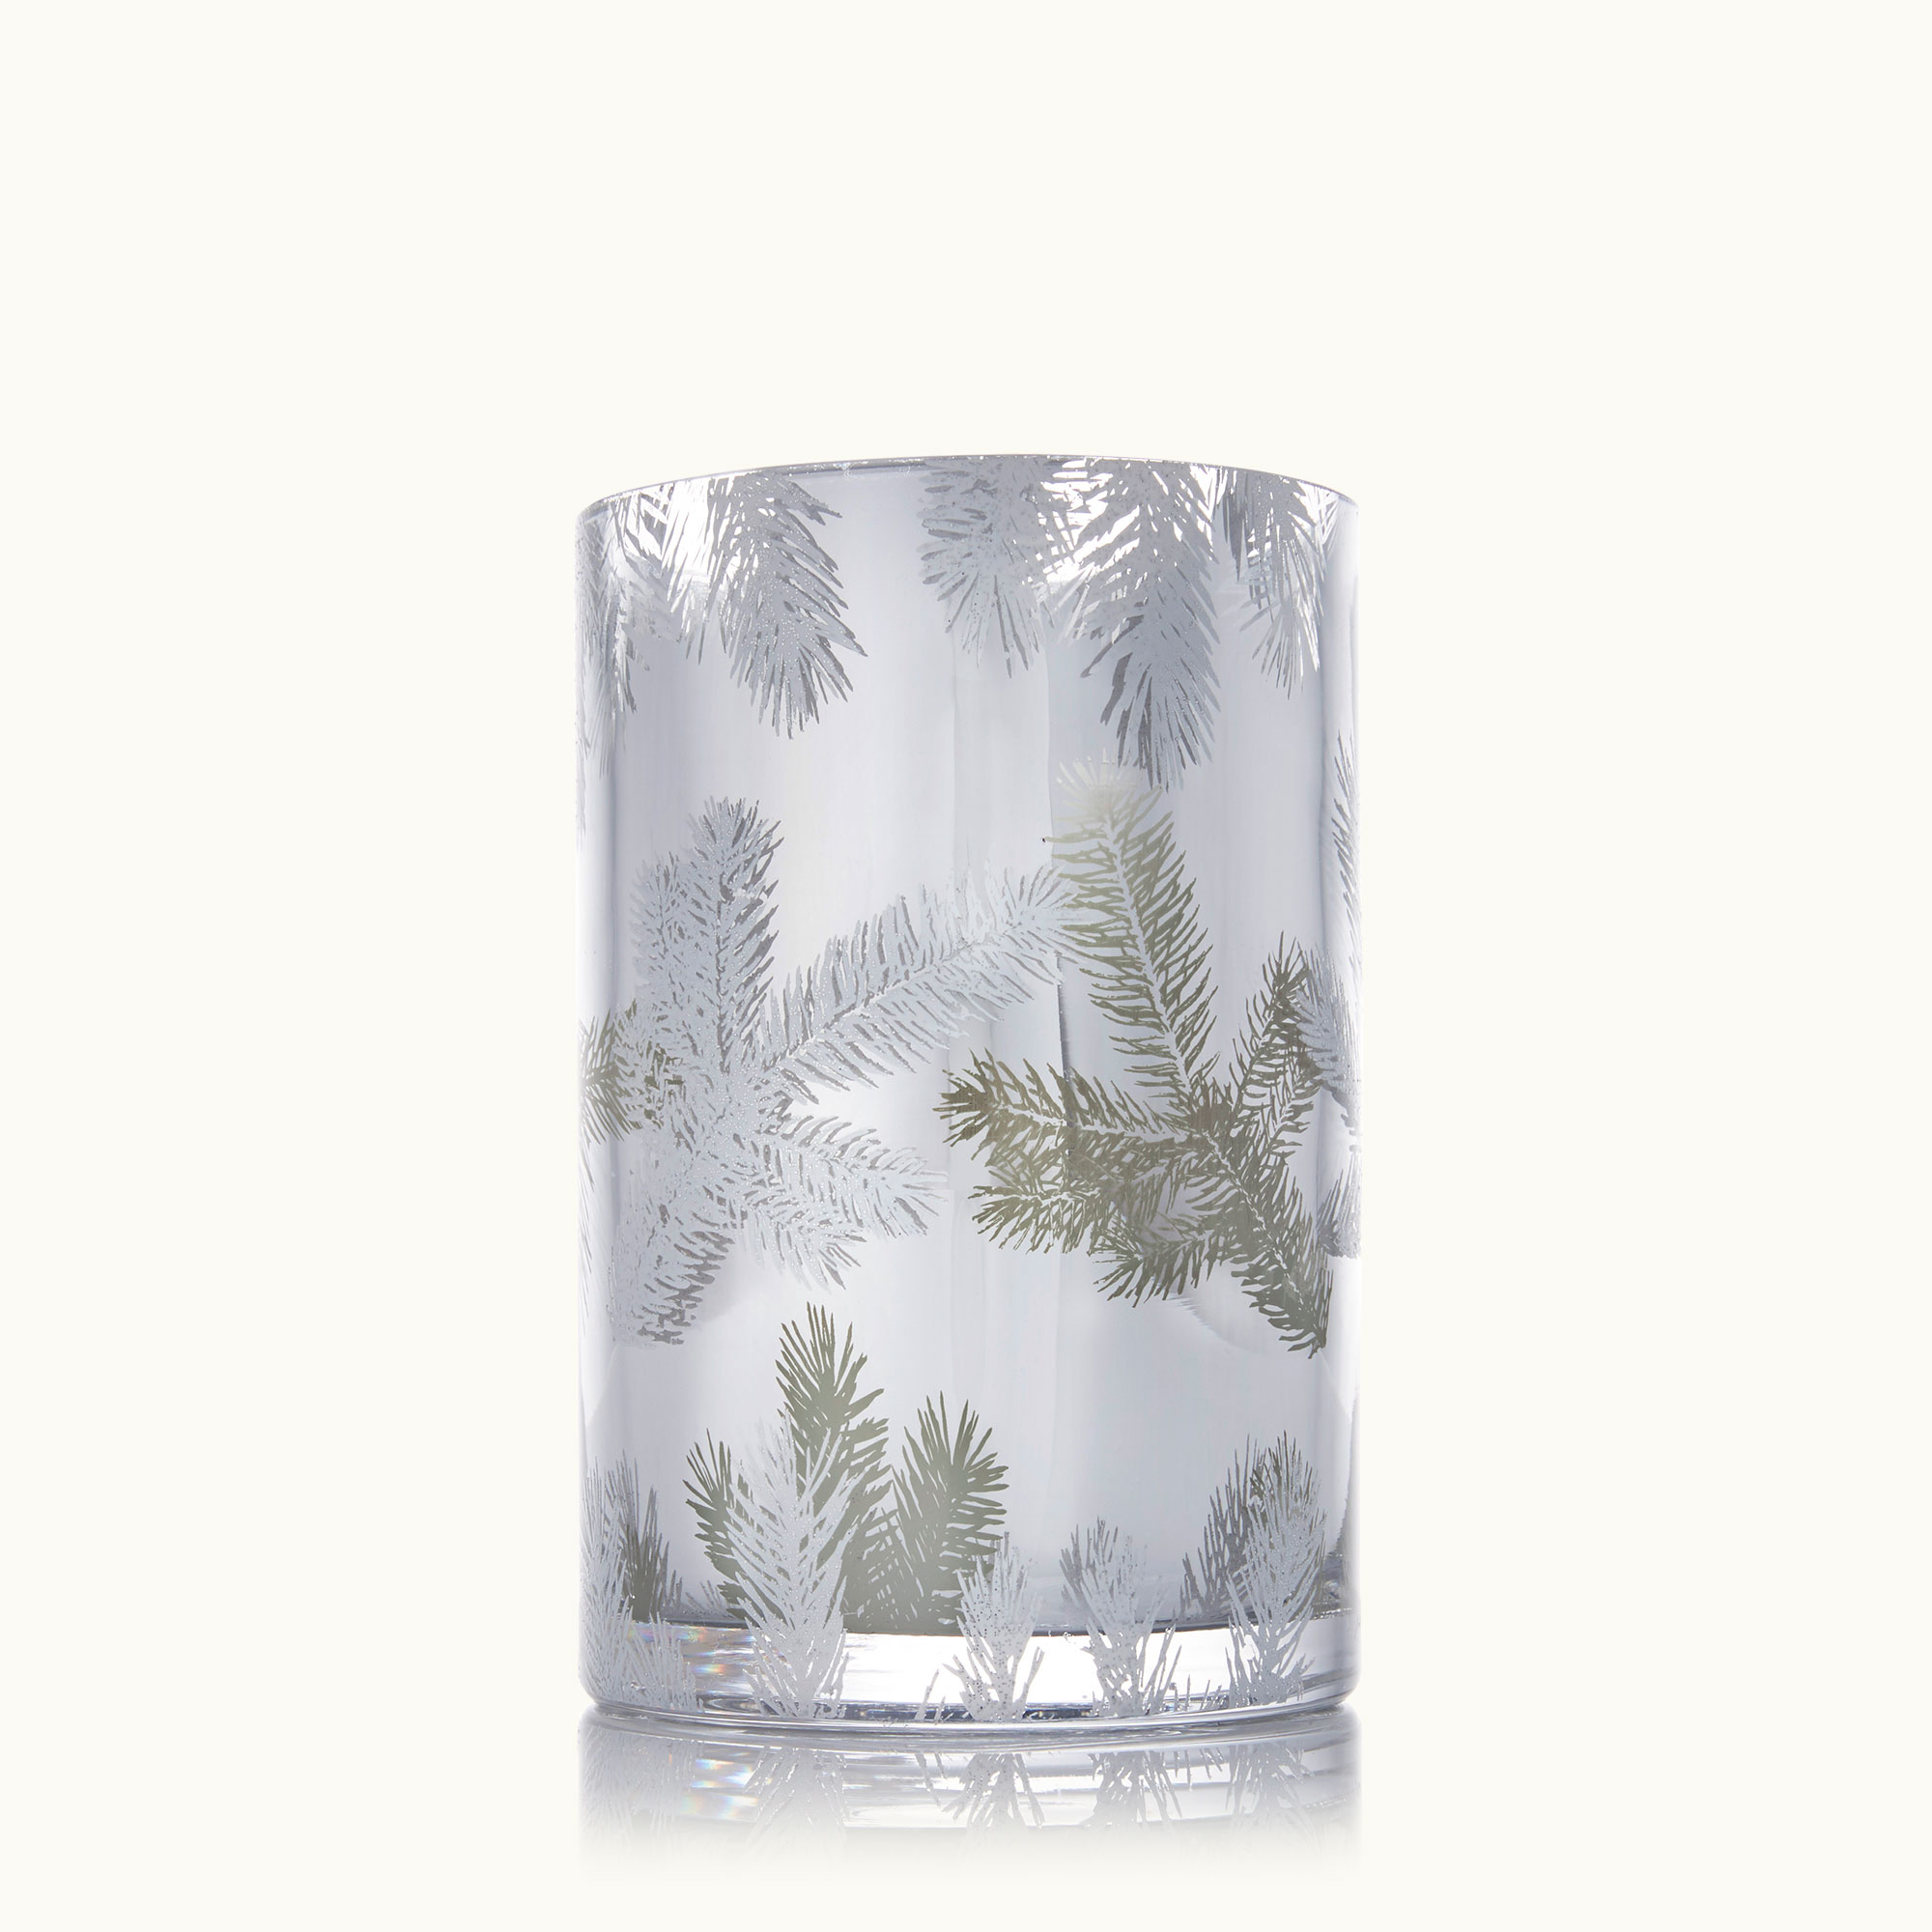 Thymes Frasier Fir Statement Candle - Silver Pine Needle 2oz